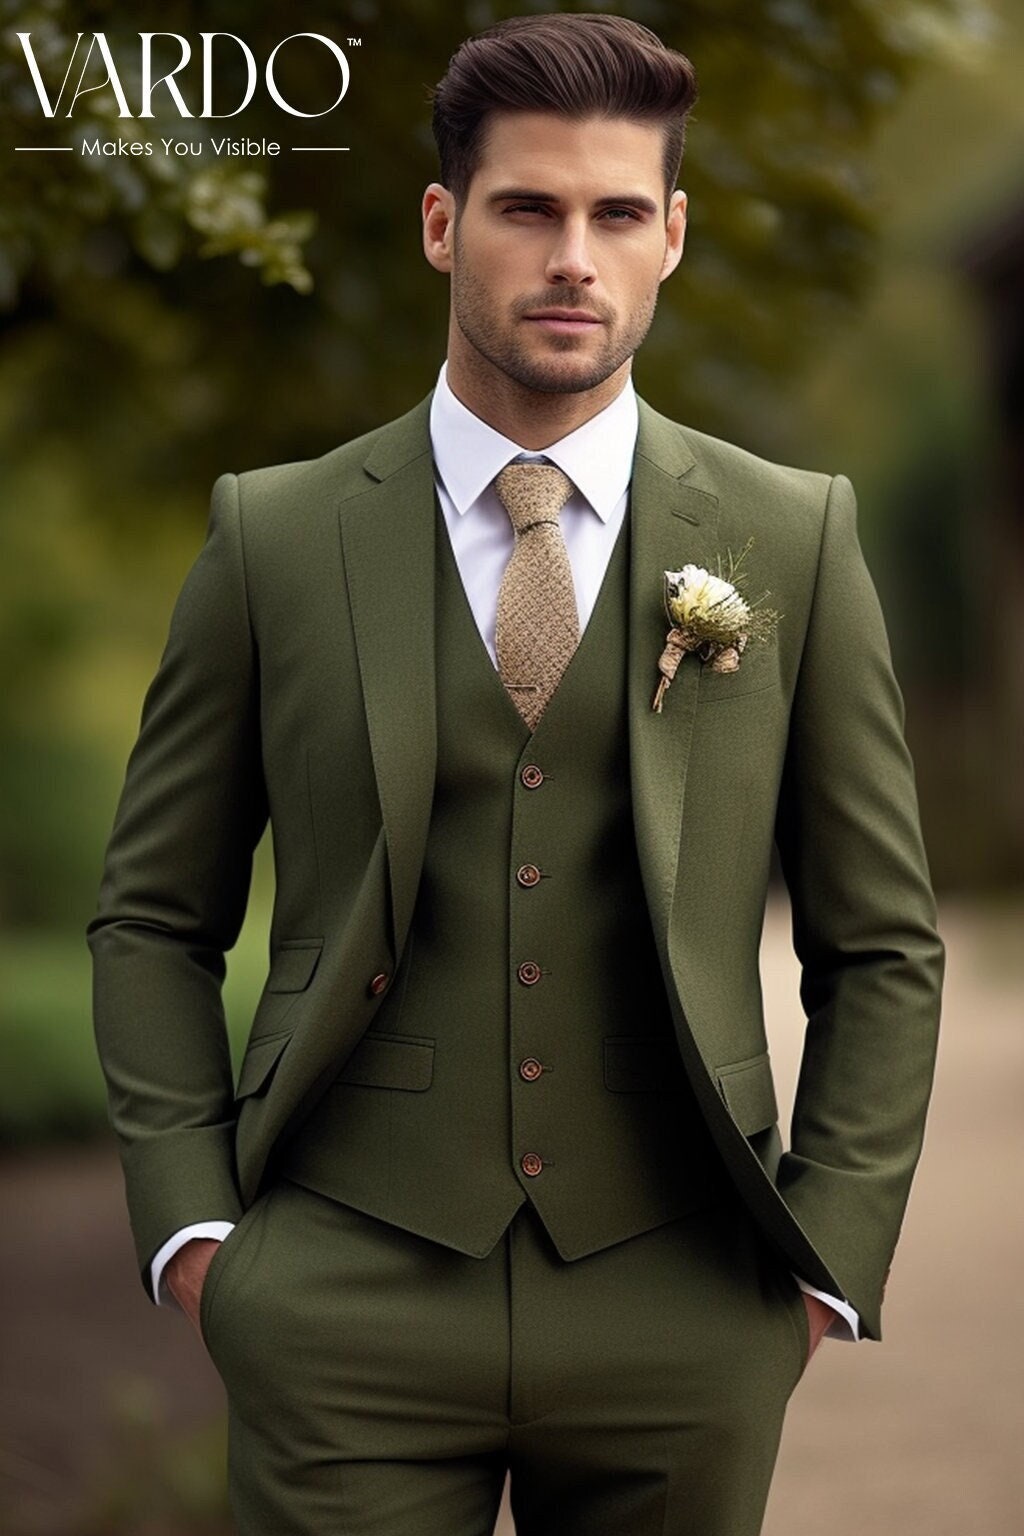 Men's Khaki Green Three Piece Suit Stylish Formal Attire for Any Occasion  Tailored Suit the Rising Sun Store, Vardo -  Canada